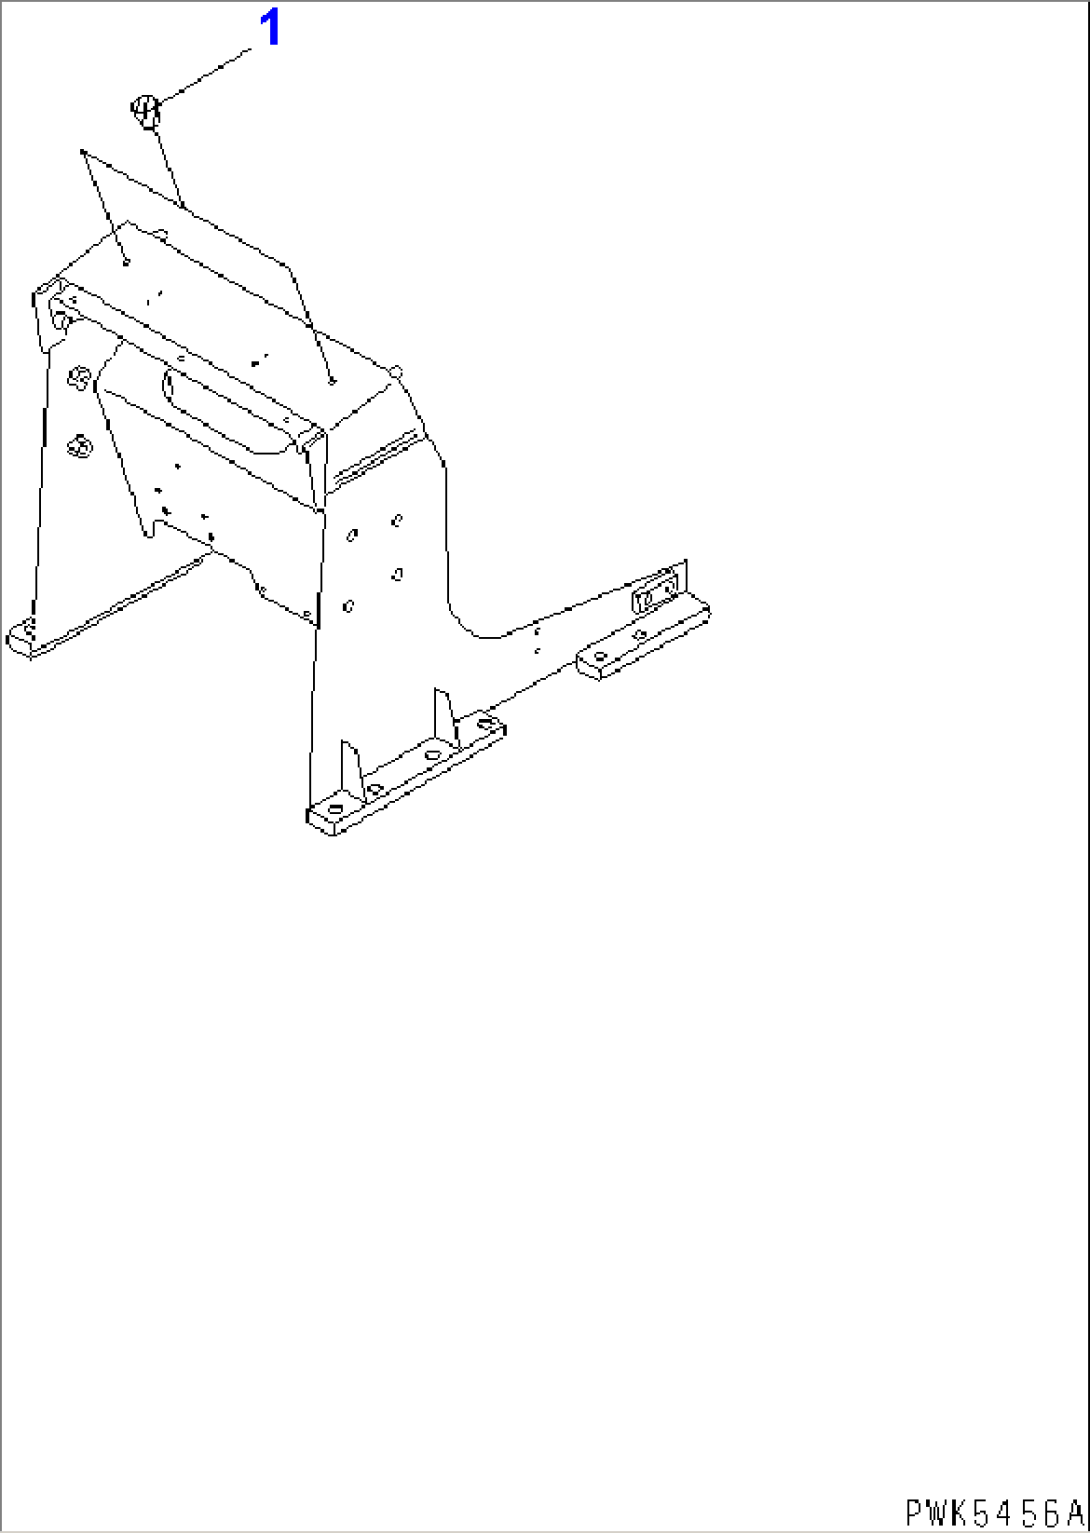 HANDRAIL (FOR 2 LEVERS STEERING 4-PILLAR TYPE CANOPY) OR (FOR ROPS CAB)